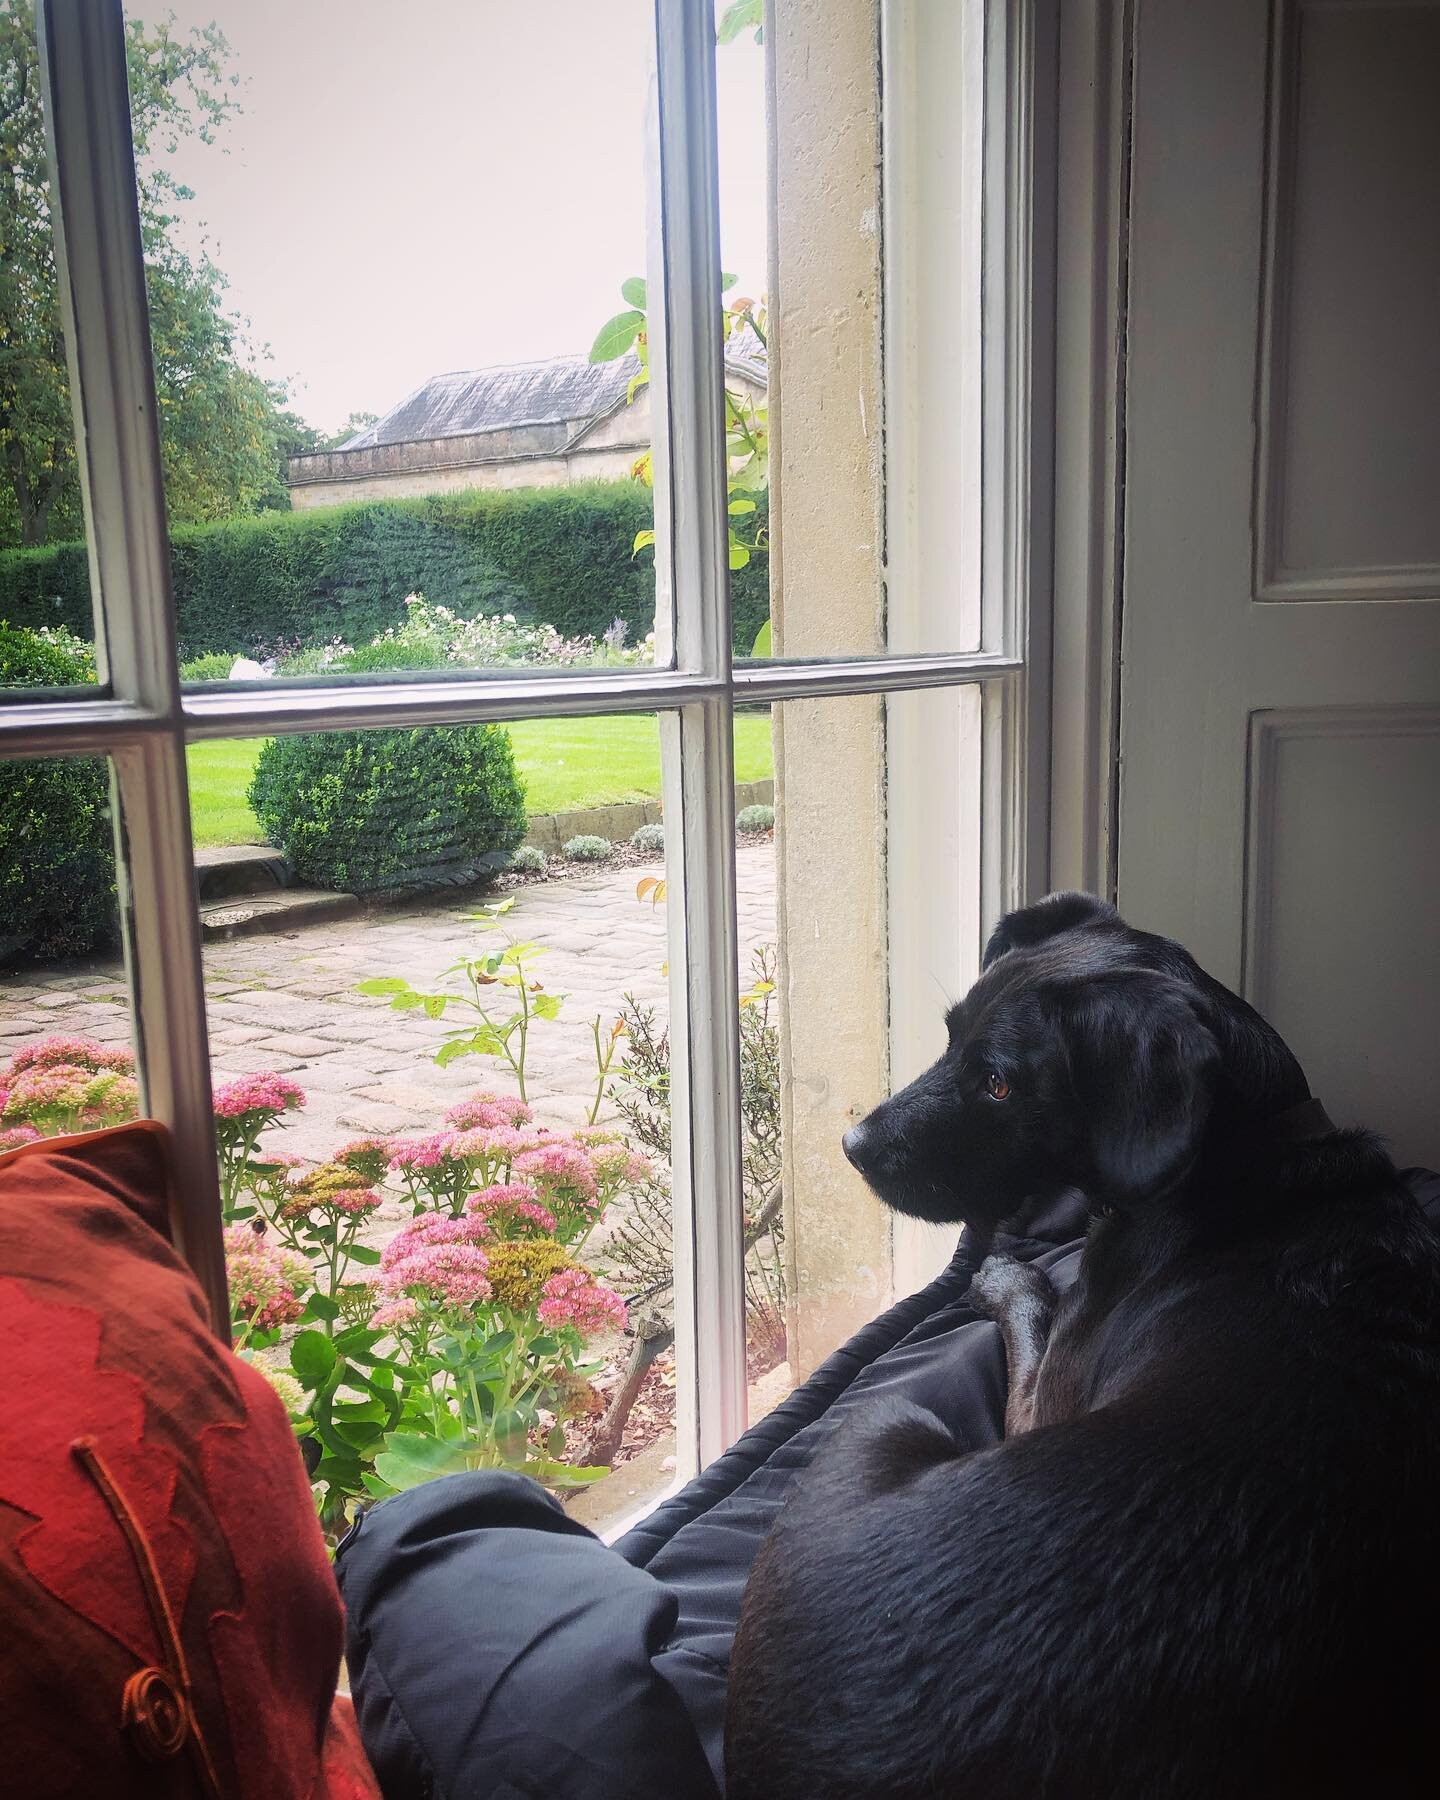 Stopped for a spot of lunch at @babingtonhouse on our way home. Usual table. Bernard watched the bumble bees. Delicious food. #lunch #babingtonhouse #lastdayofholiday #dogspotter #doglover #lunch #bumblebee